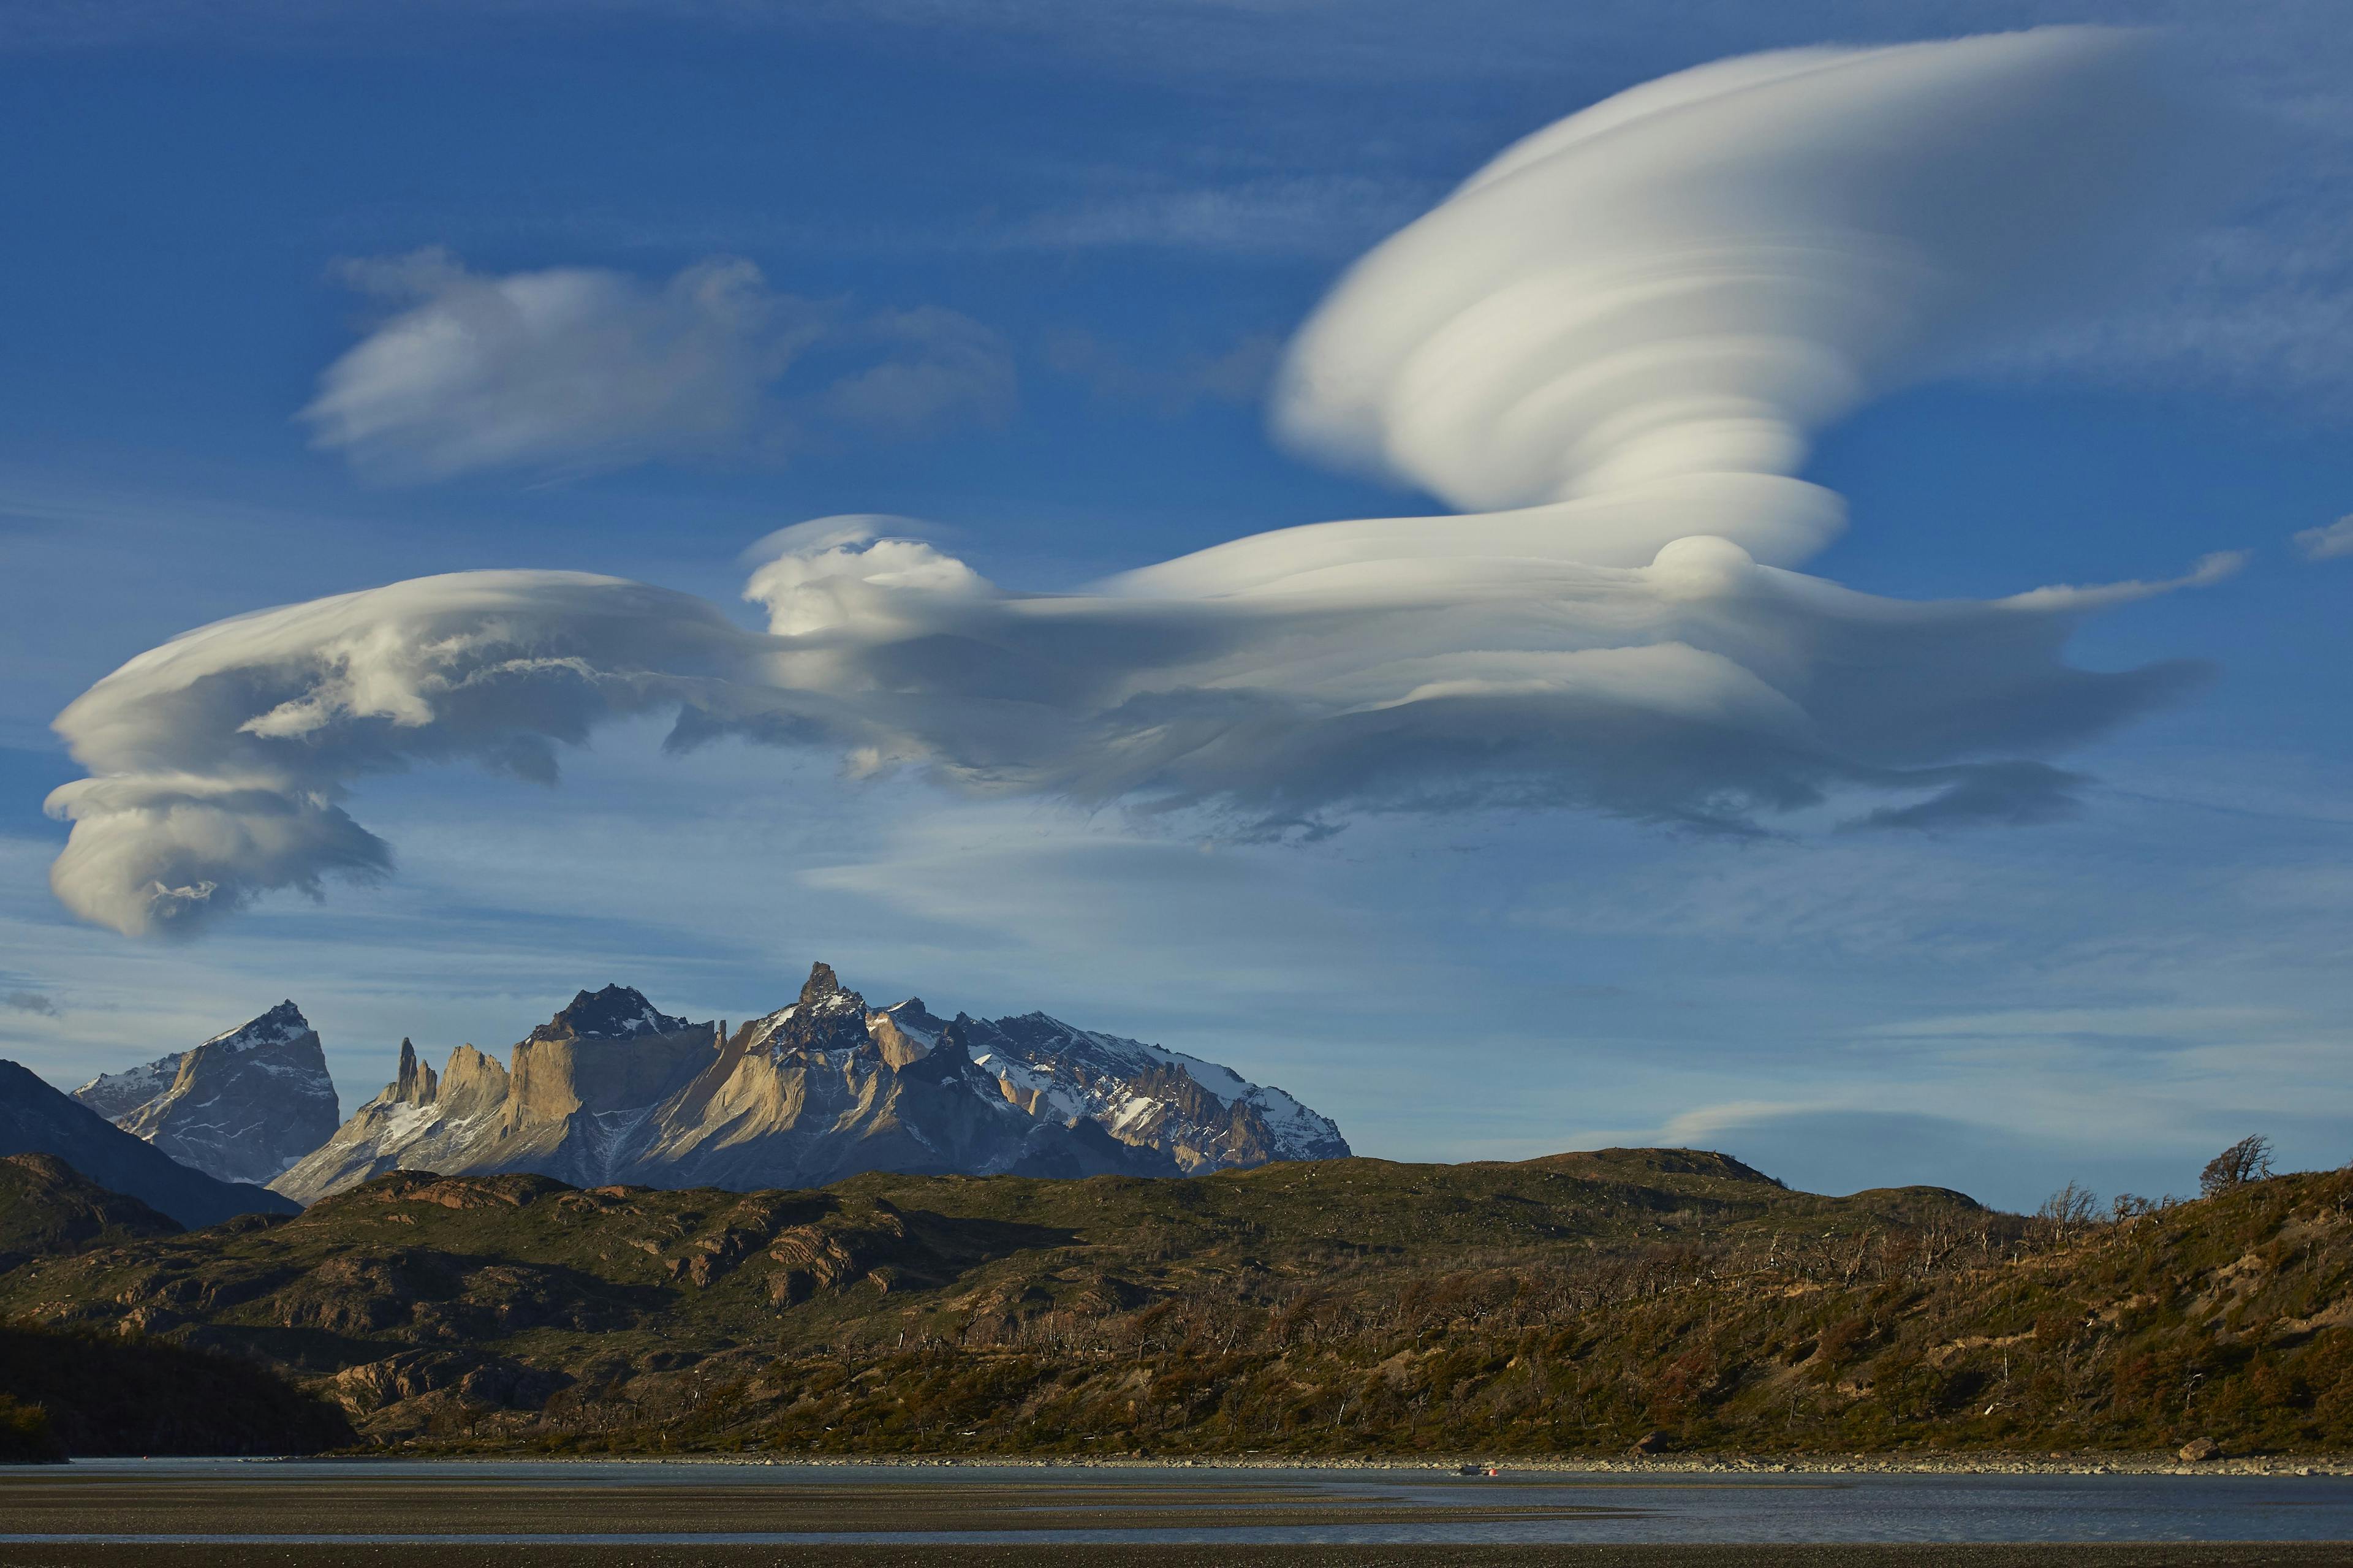 Lenticular cloud formation over a beautiful mountain range